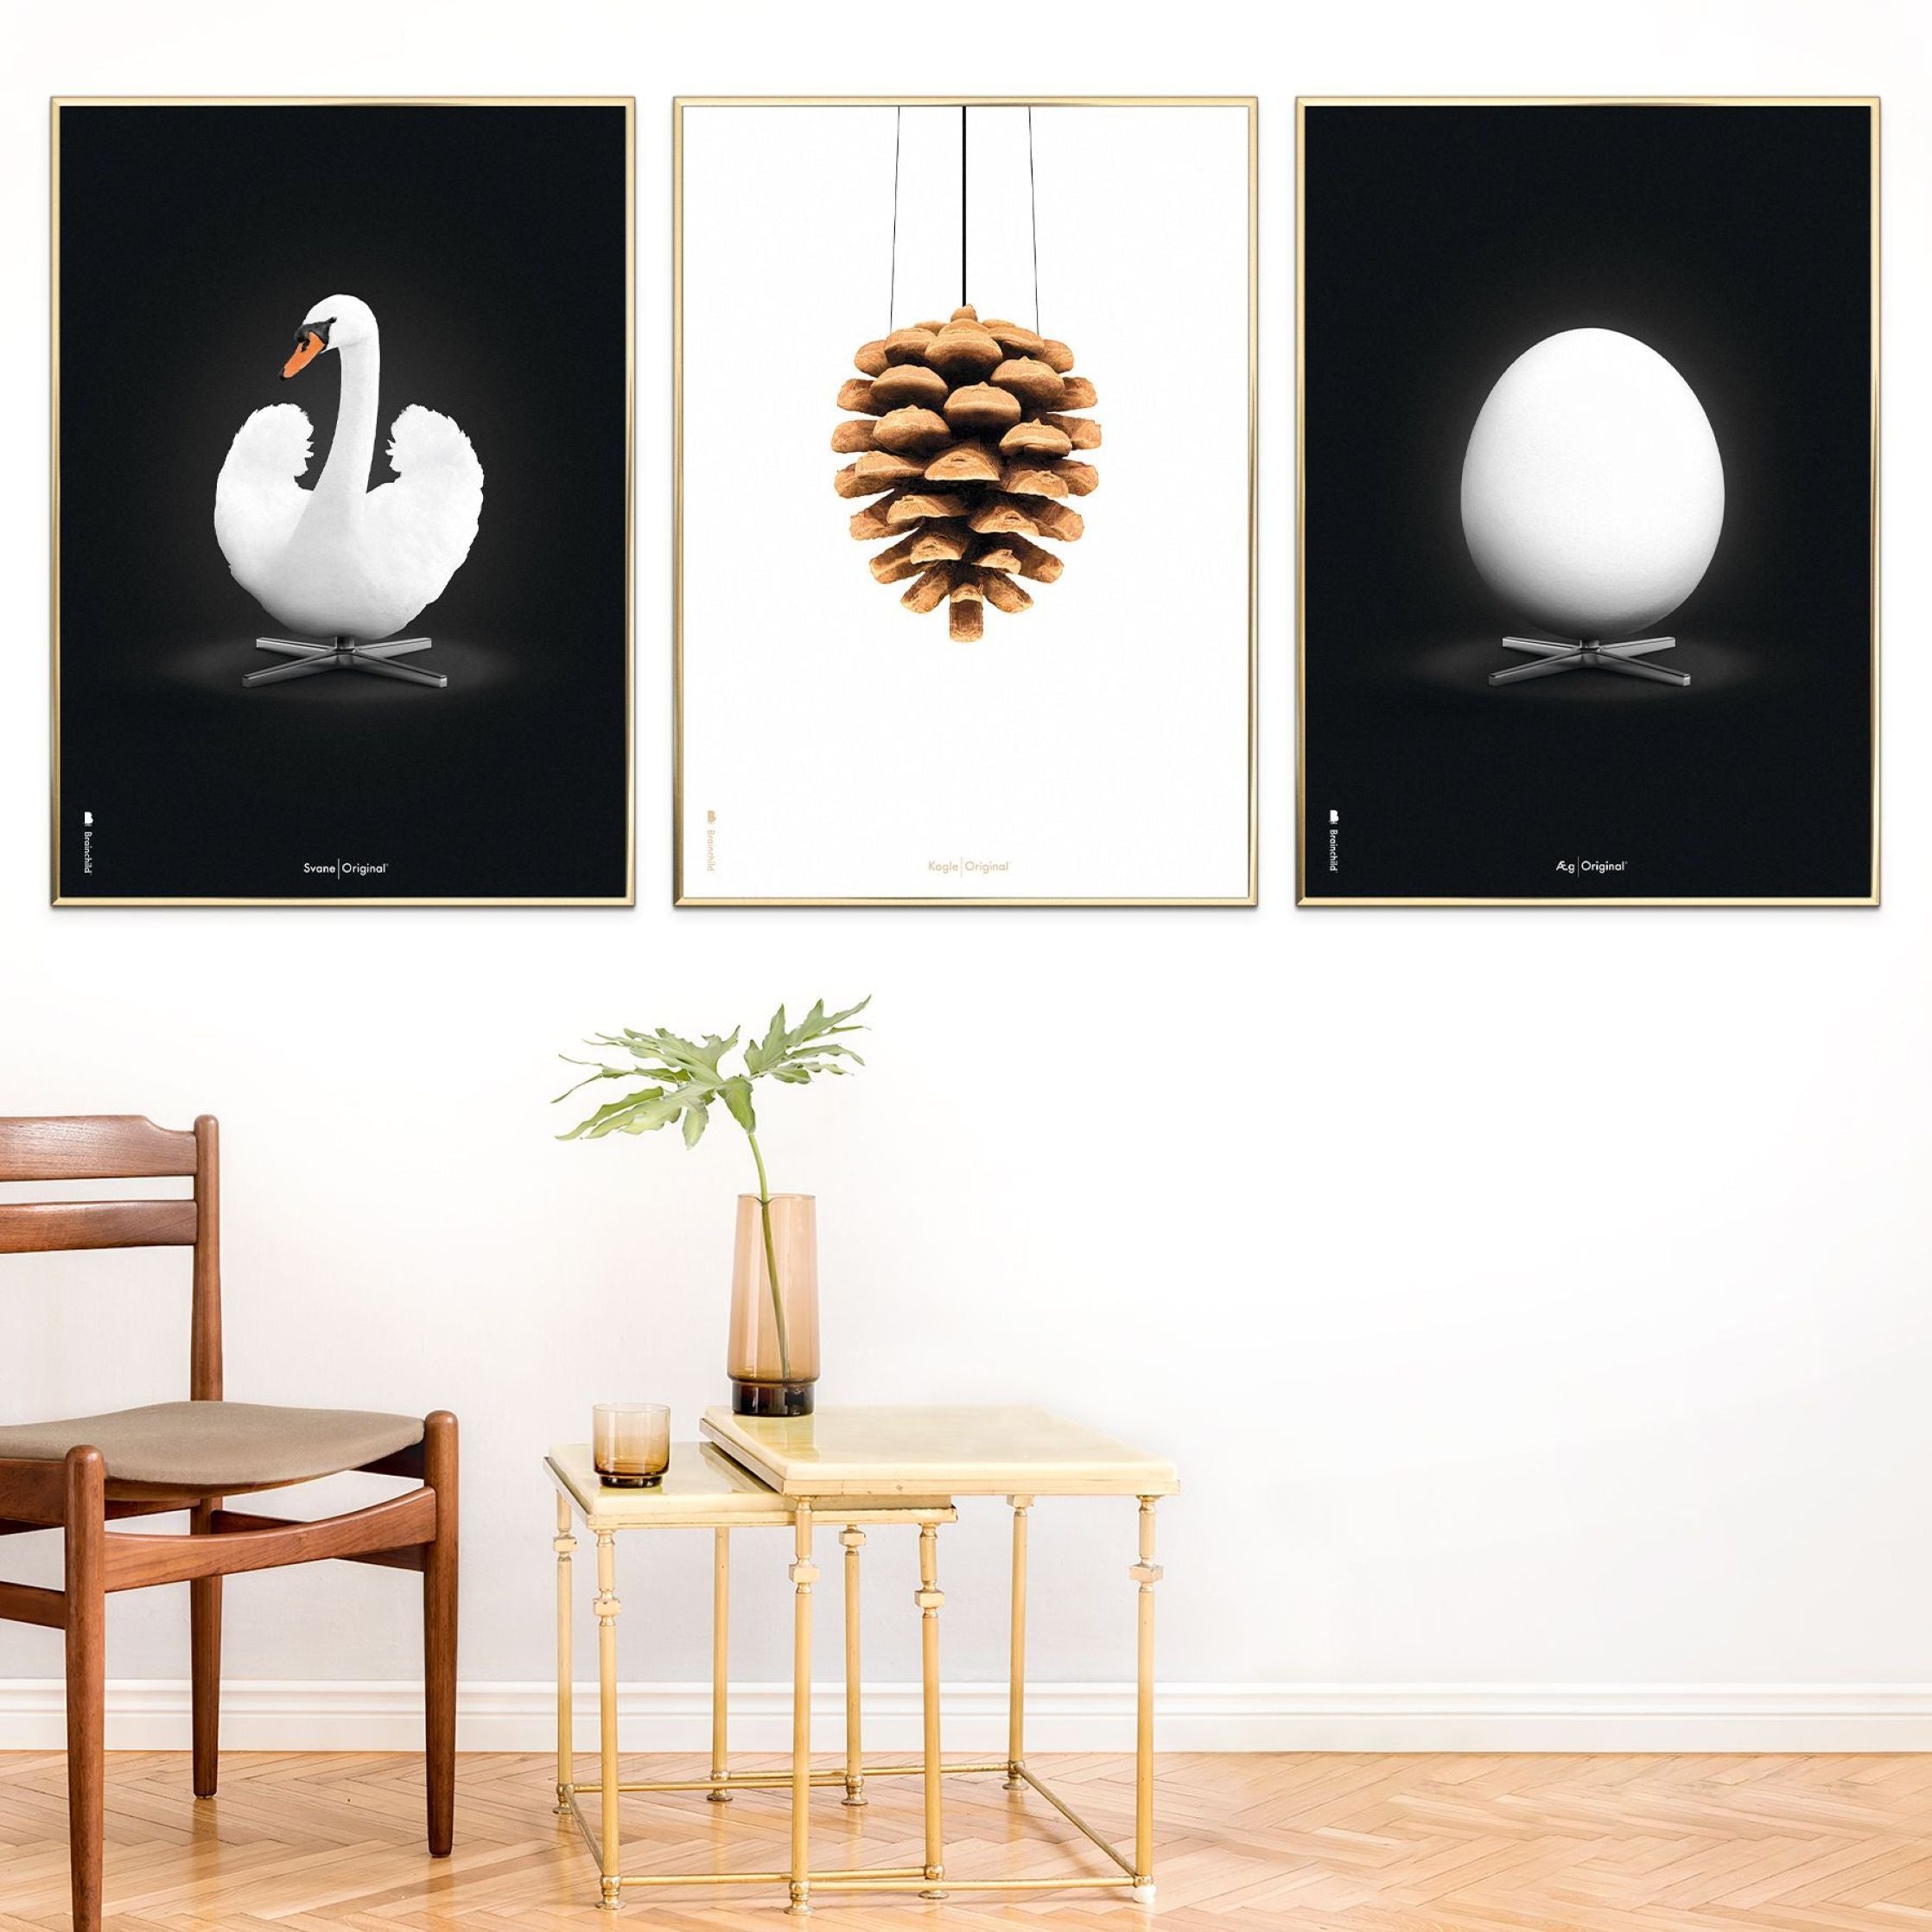 Brainchild Egg Classic Poster, Frame In Black Lacquered Wood A5, Black Background